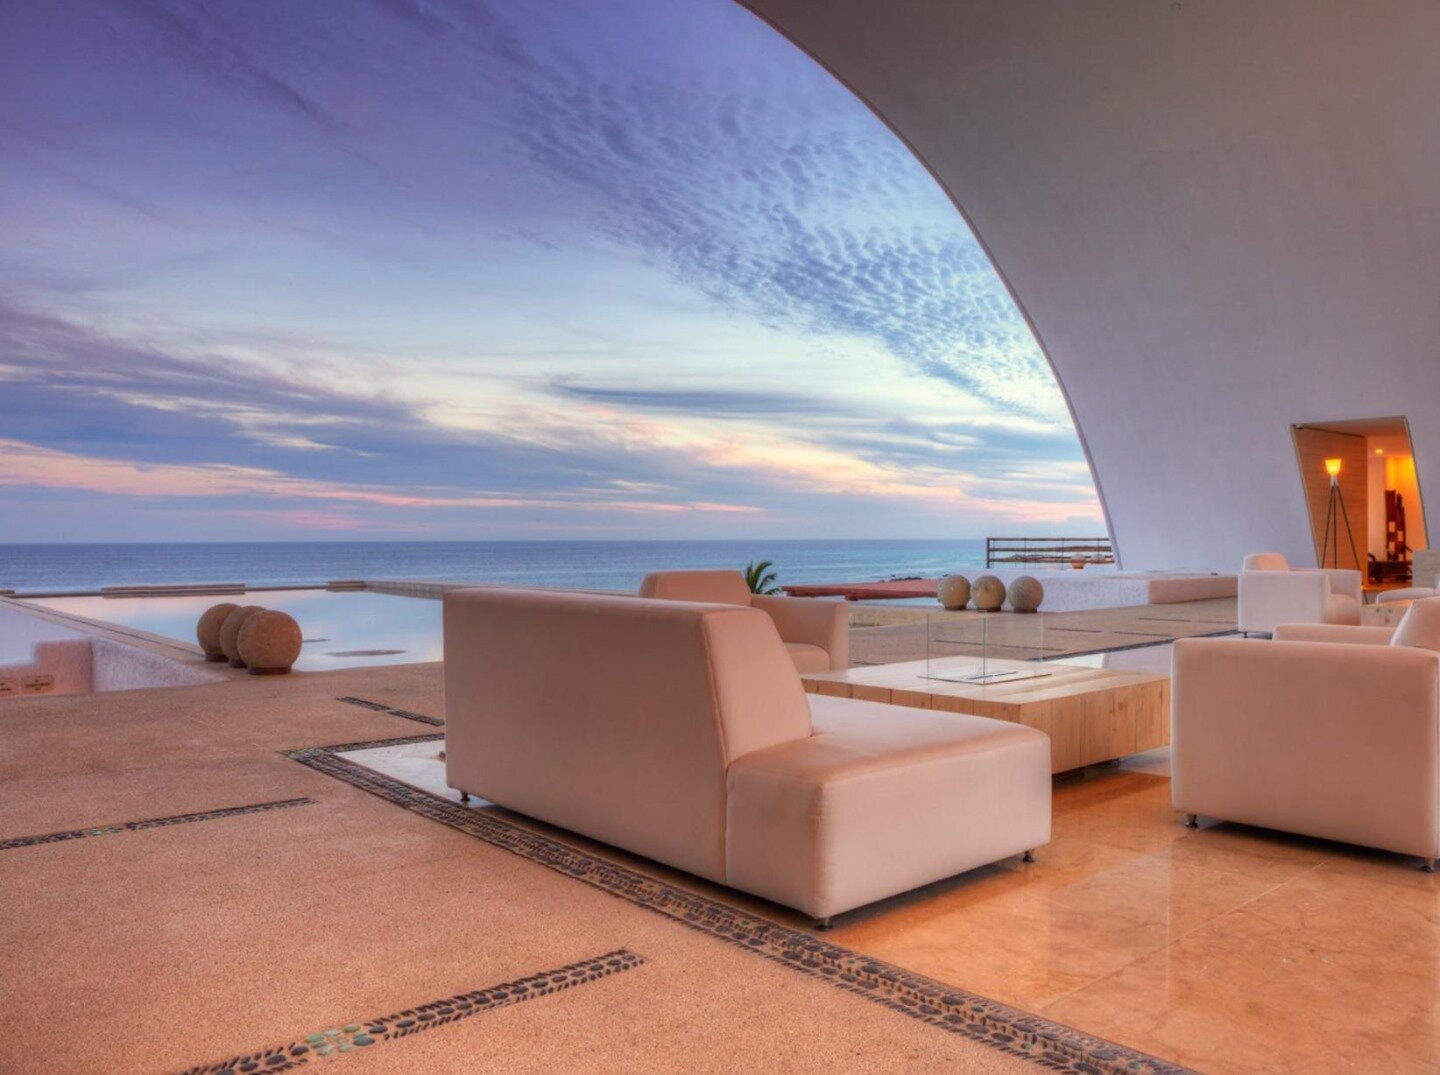 I am always a sucker for outdoor living spaces. I love this lobby and the clever use of archways, to frame the ocean view, at the Marquis Los Cabos. Unfortunately this is an adults only hotel, which means I will probably never stay there. Tropical va